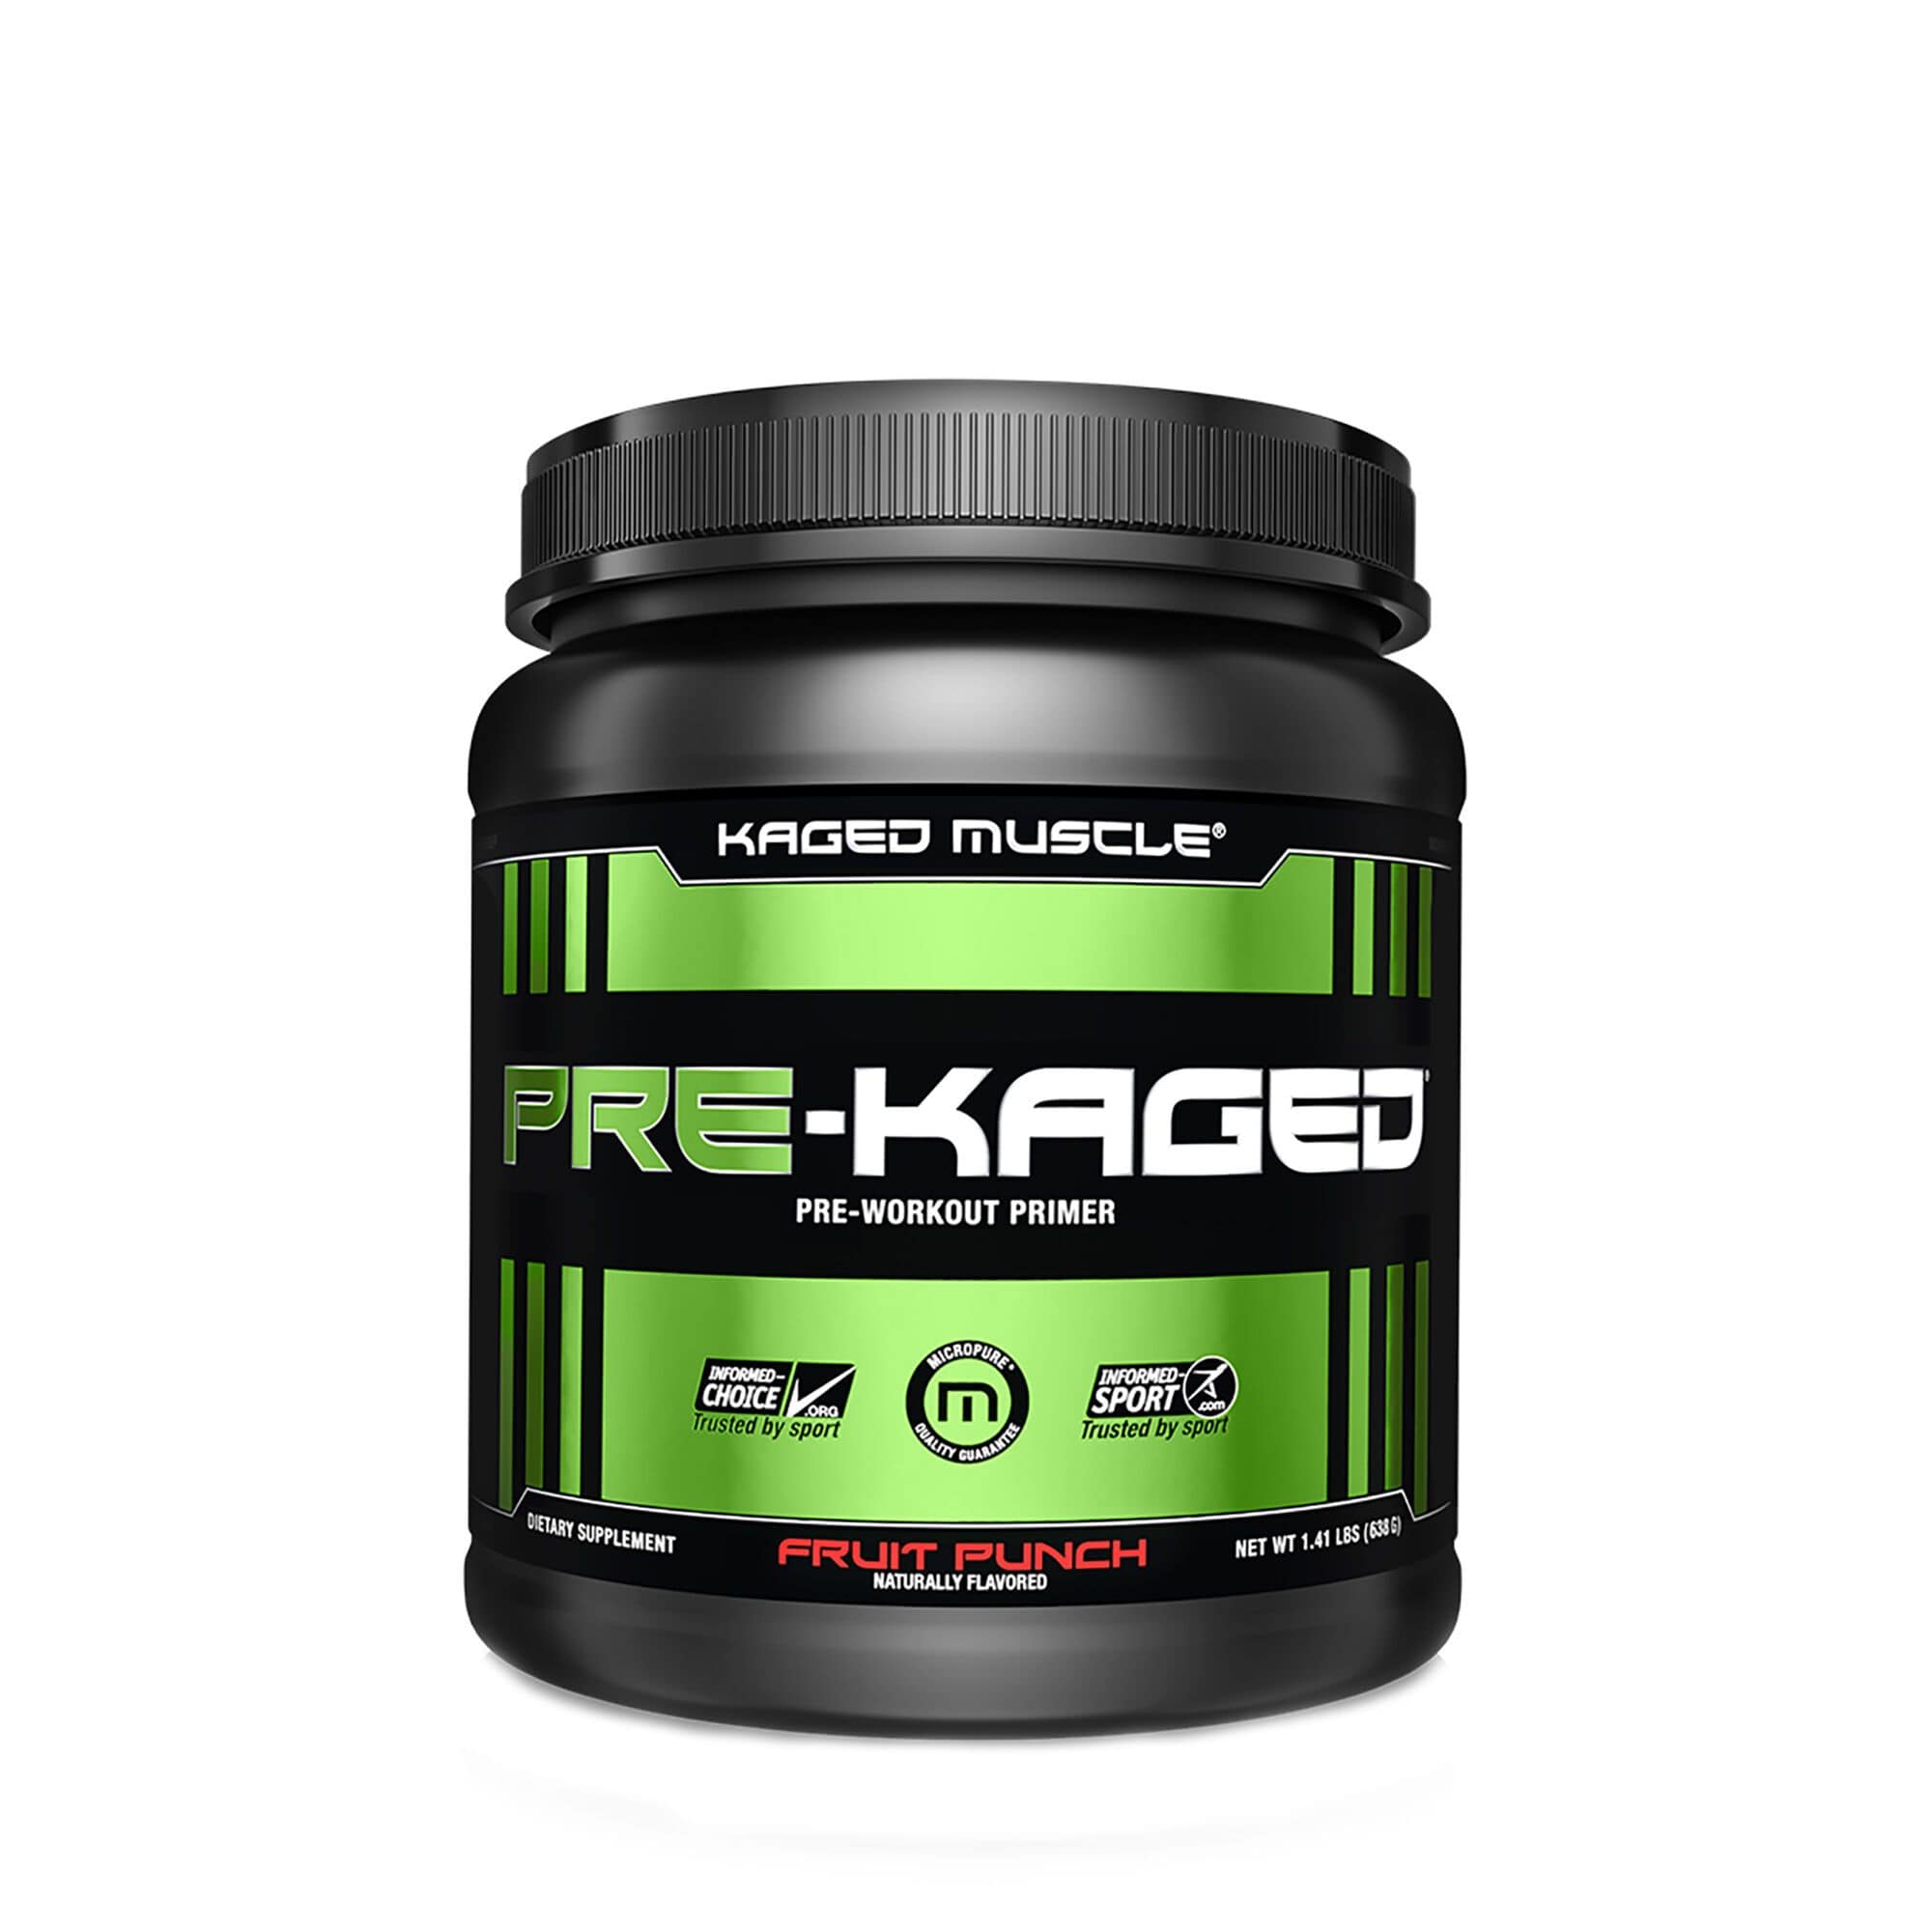 Kaged MusclePre-Kaged - Pre-Workout PrimerPre-WorkoutRED SUPPS